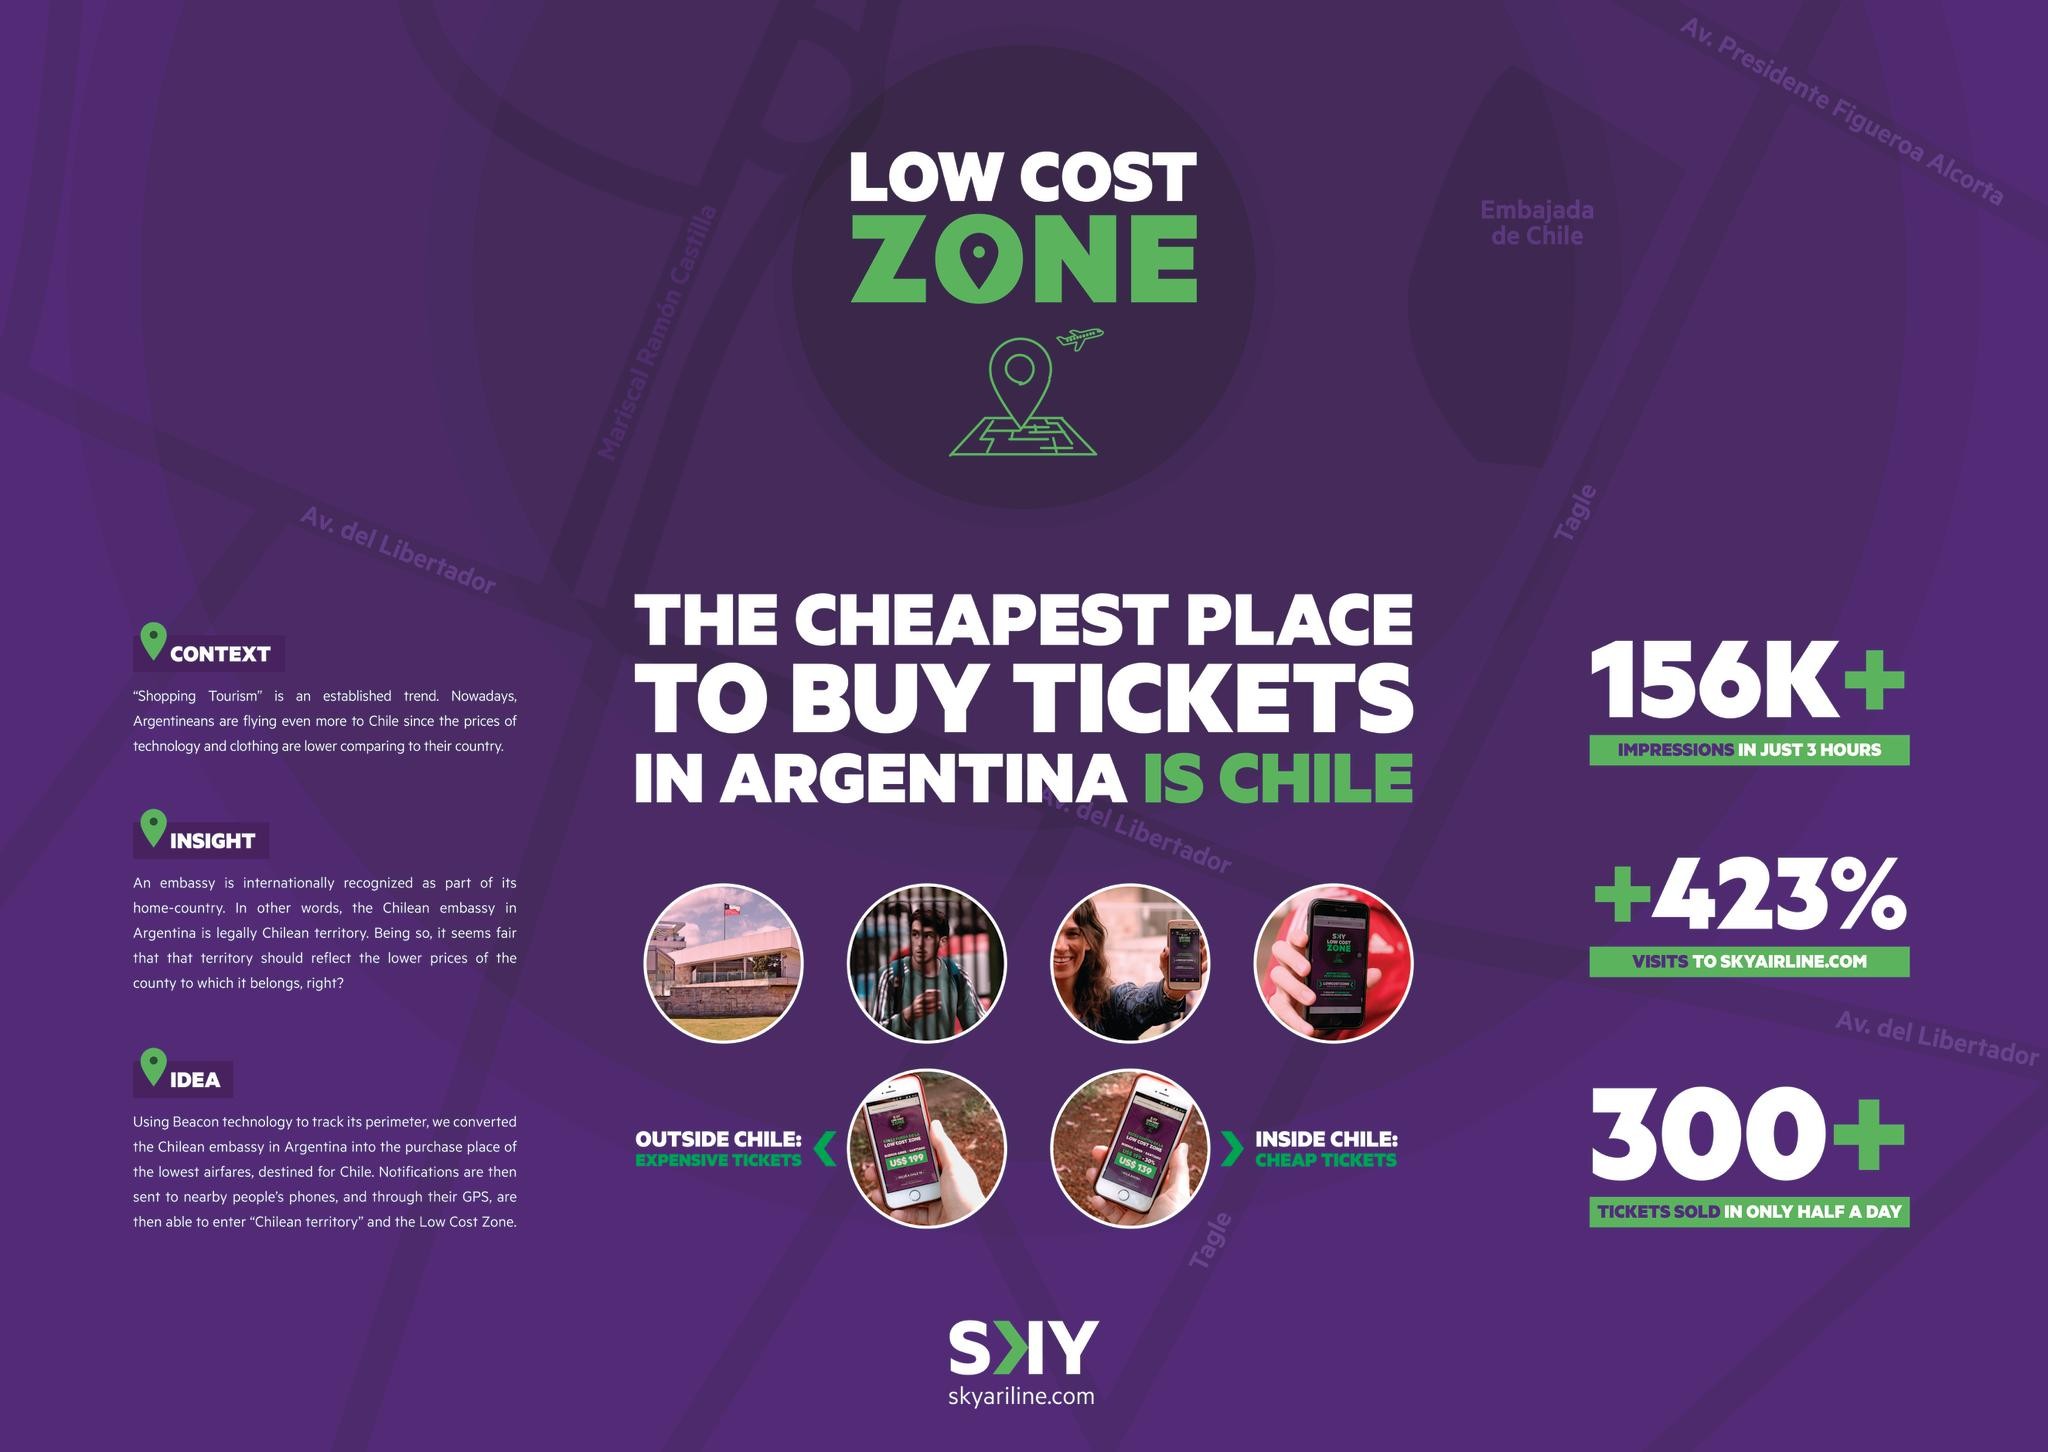 LOW COST ZONE